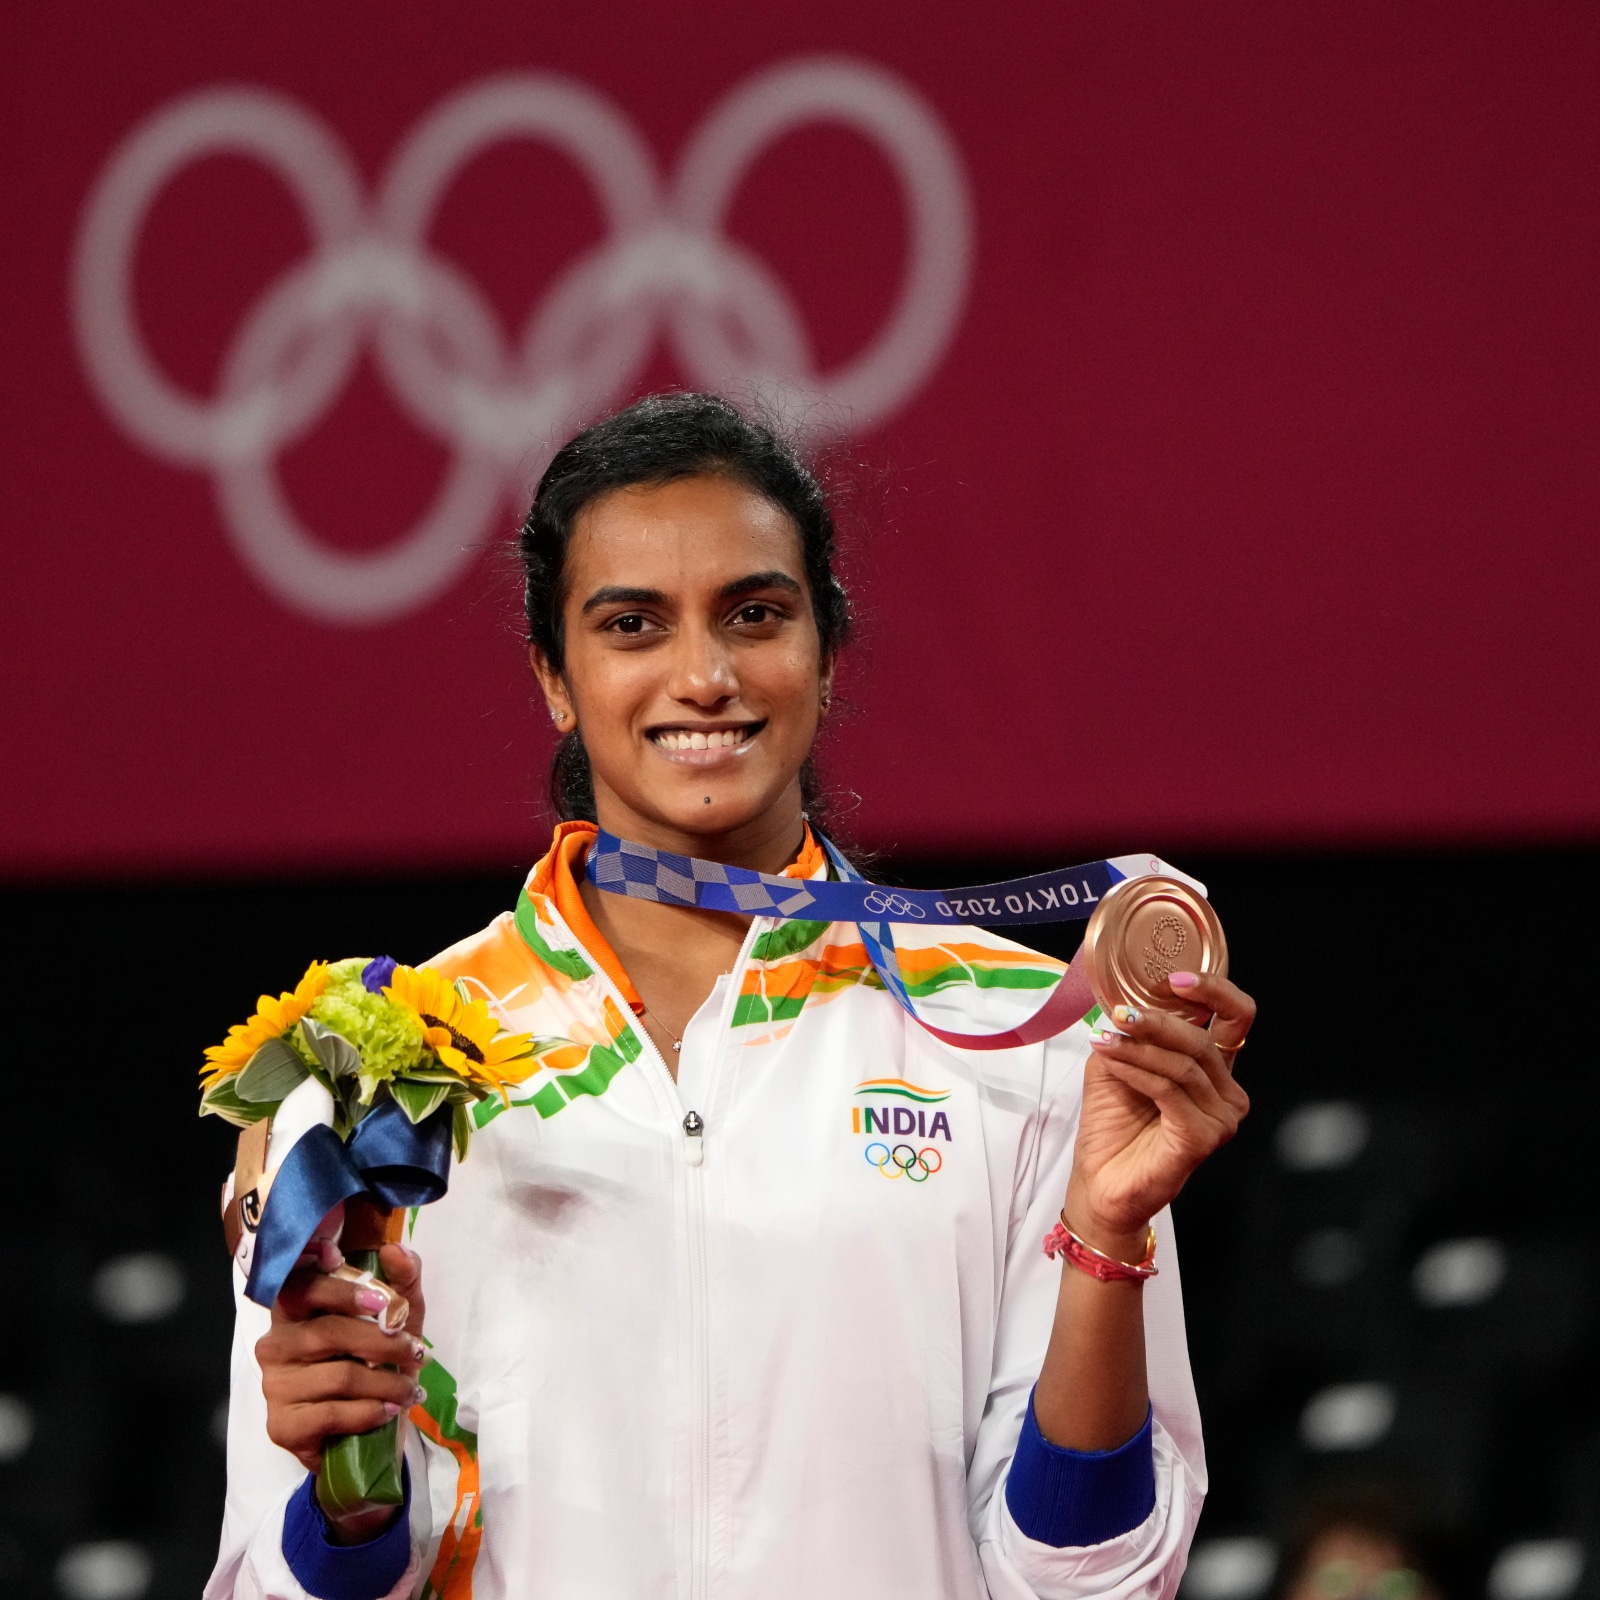 Tokyo 2020: India's Greatest Sportsperson PV Sindhu's Best Years Yet to  Come - News18